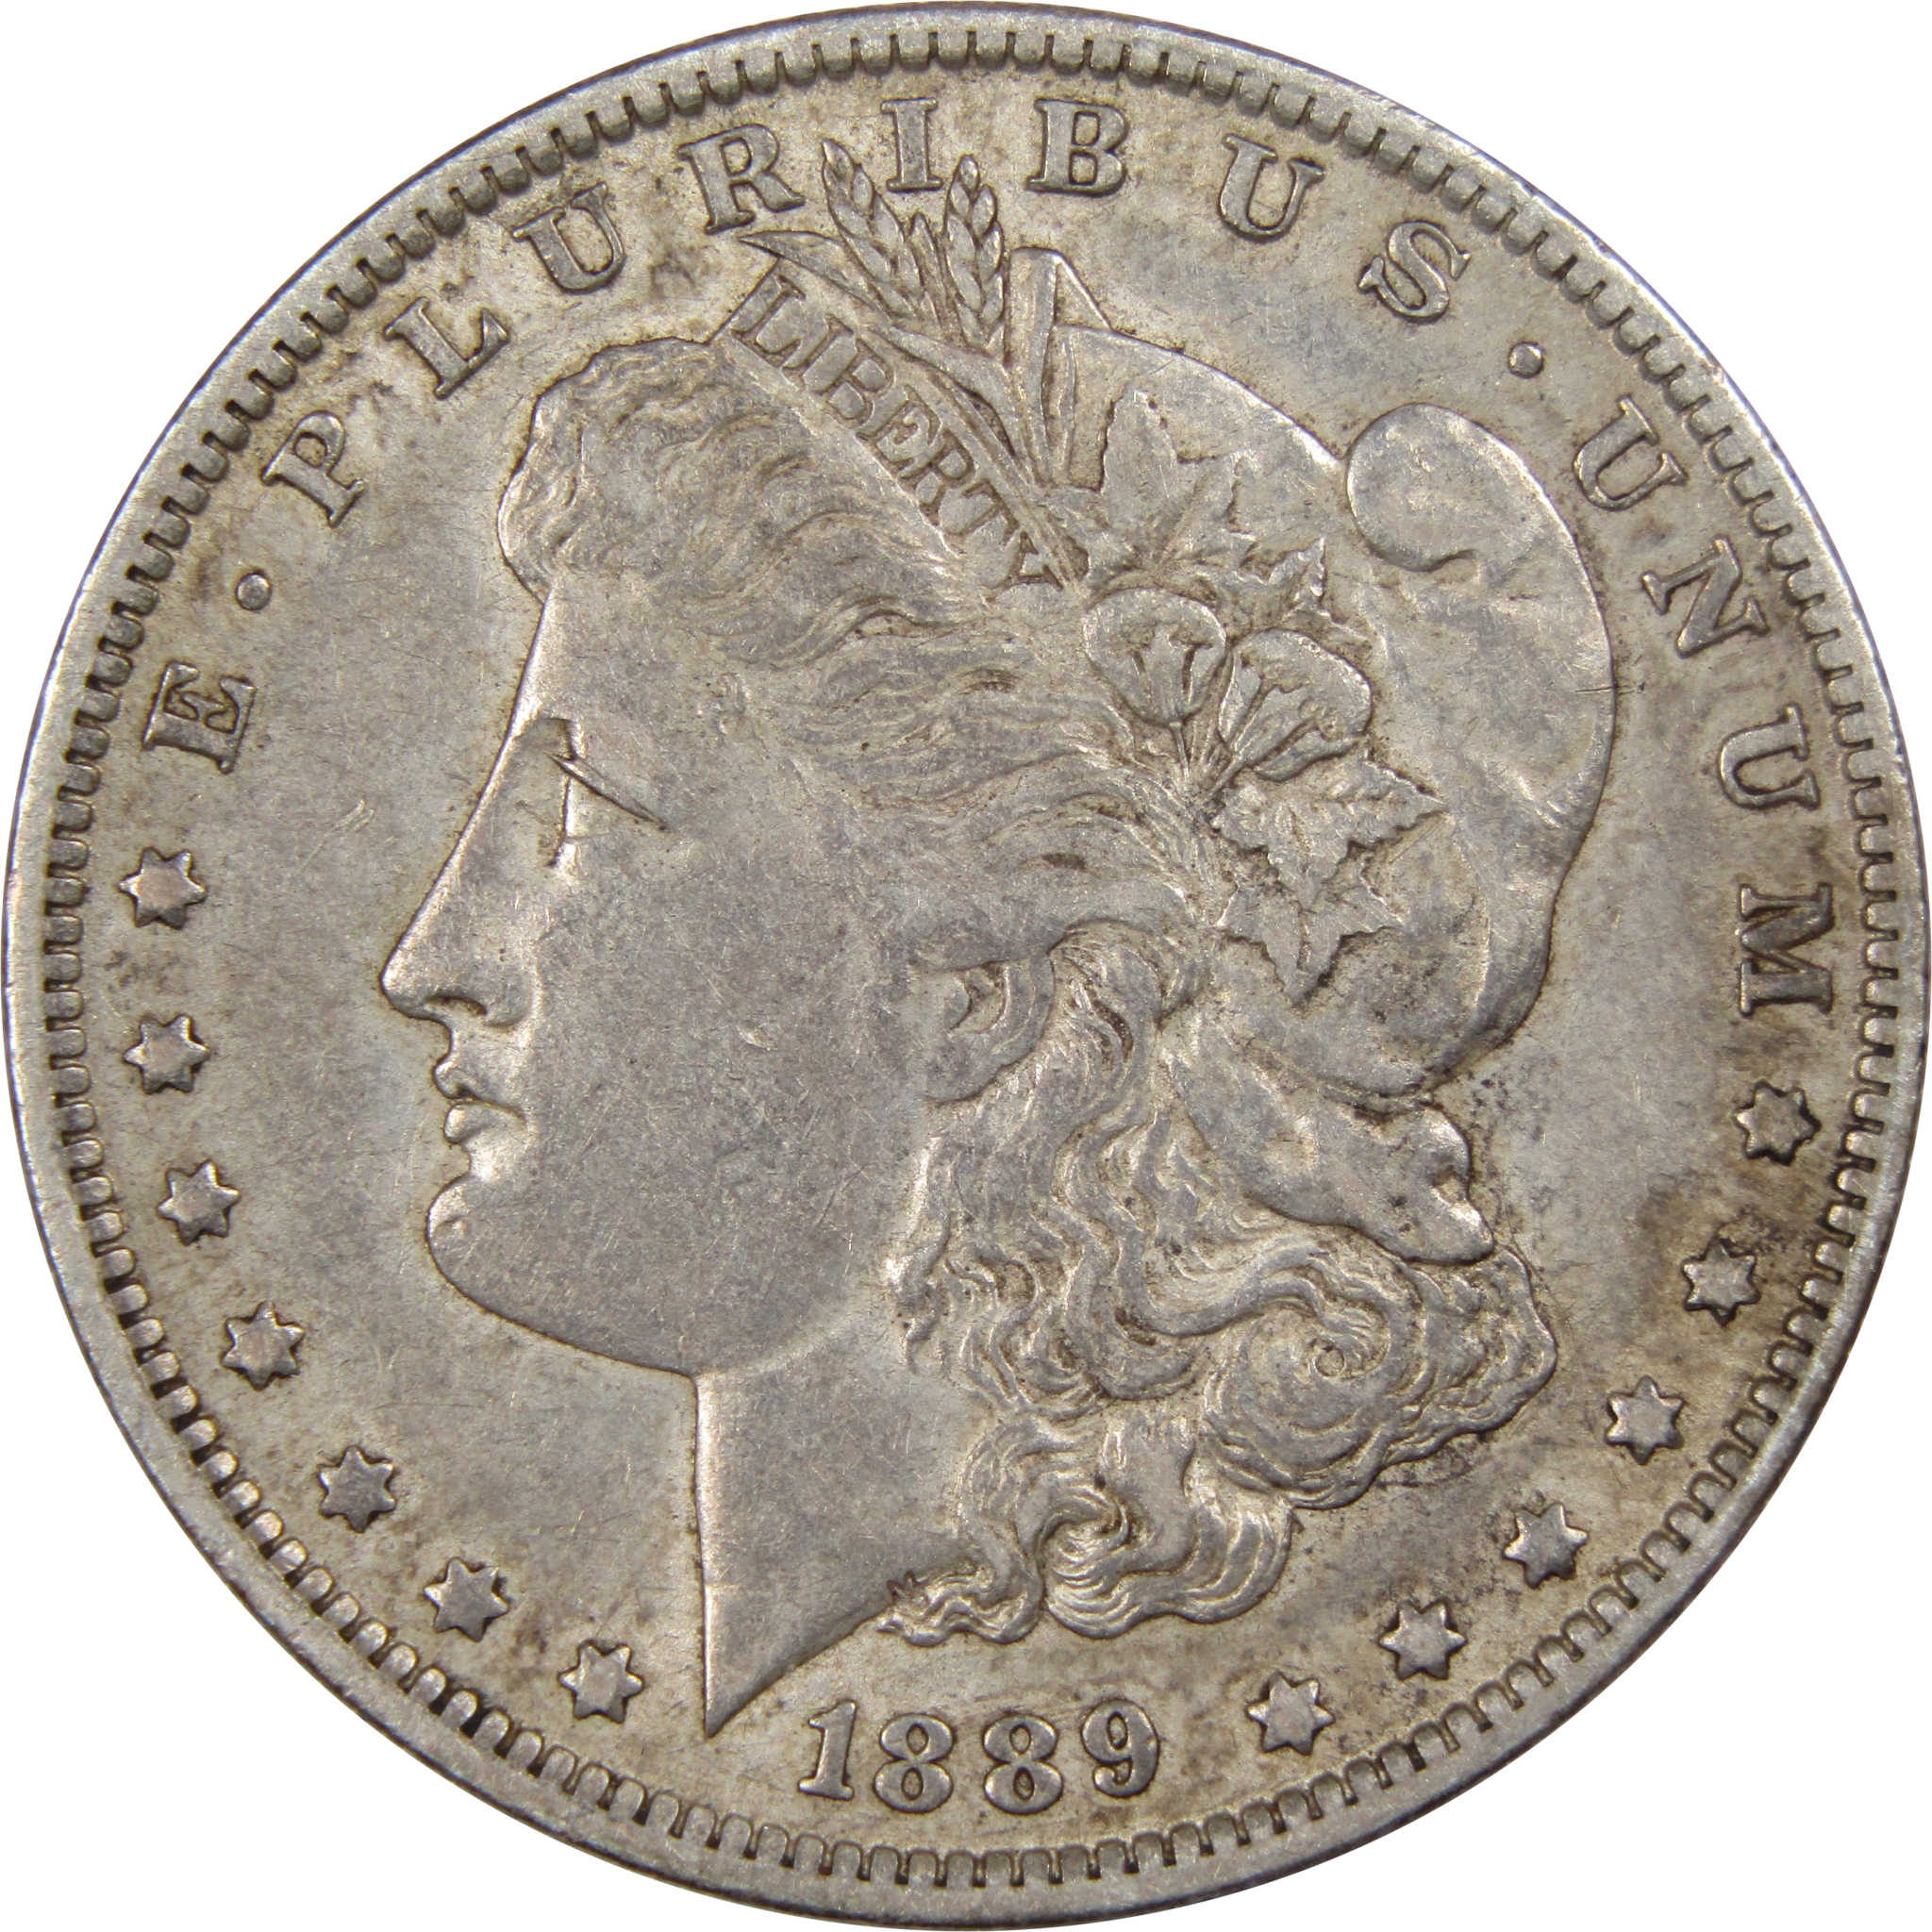 1889 O Morgan Dollar XF EF Extremely Fine 90% Silver Coin SKU:I1502 - Morgan coin - Morgan silver dollar - Morgan silver dollar for sale - Profile Coins &amp; Collectibles